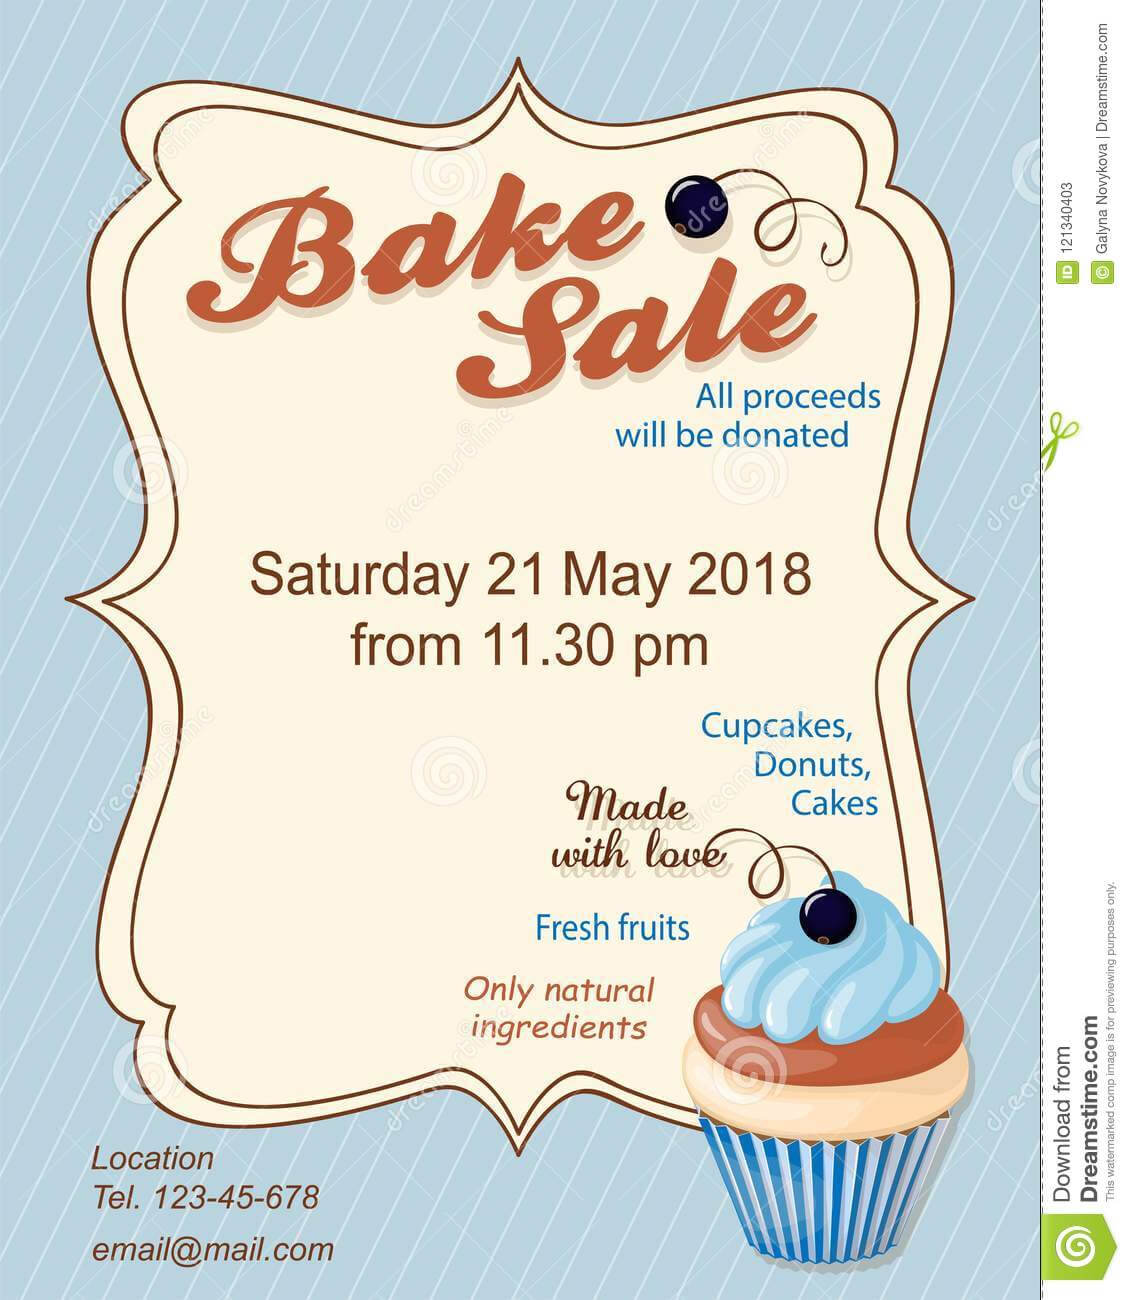 Blue Bake Sale Promotion Flyer With Blueberry Cupcake Stock For Bake Sale Flyer Free Template